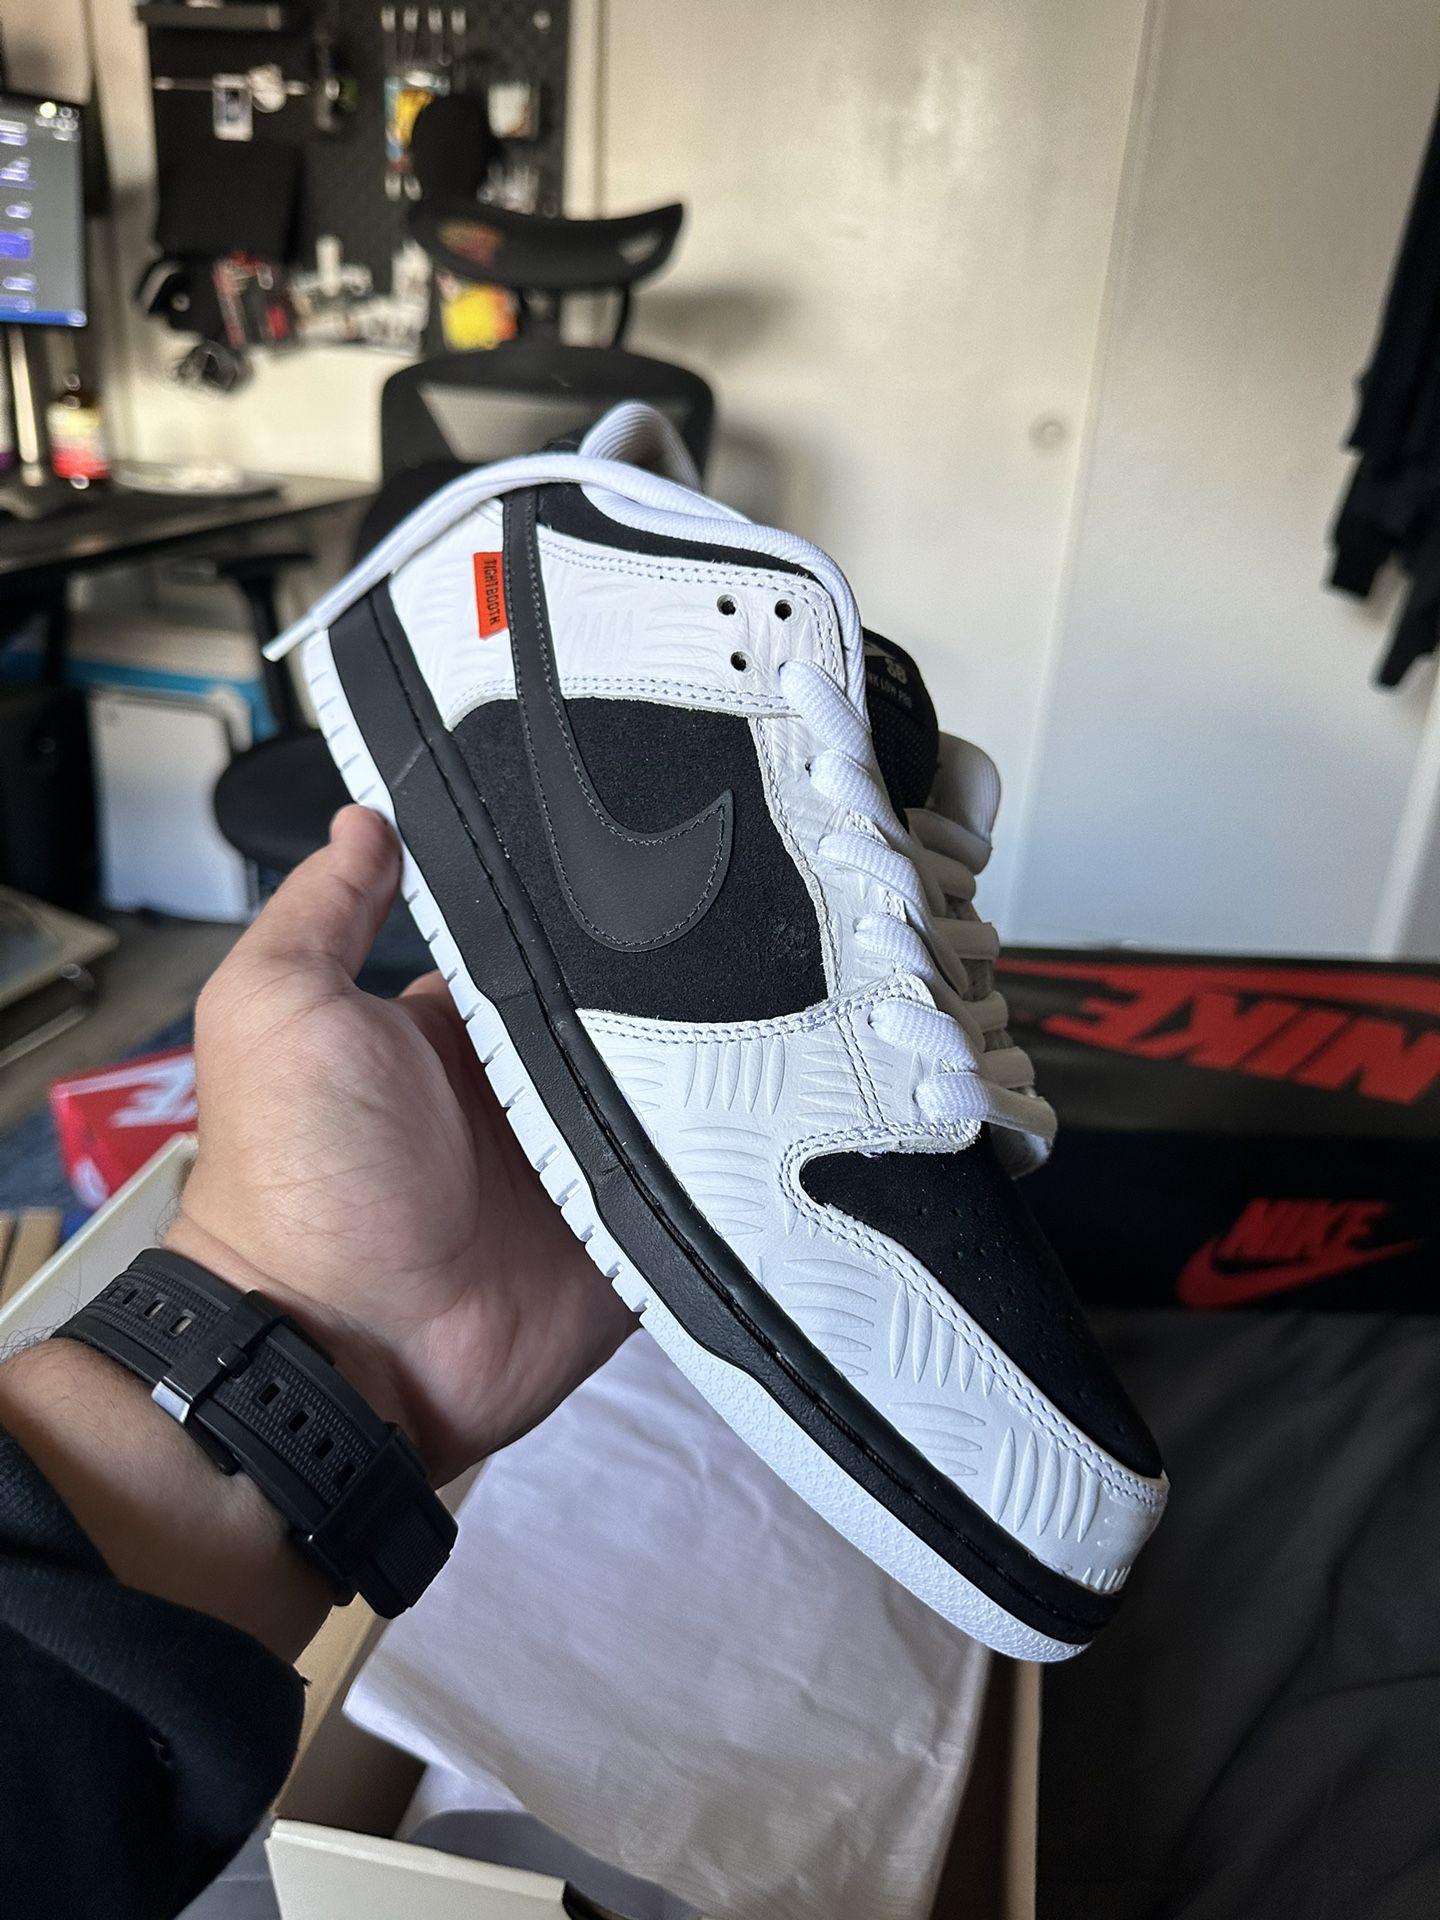 Nike Sb Dunk Size 11 Tightbooth for Sale in Paramount, CA - OfferUp